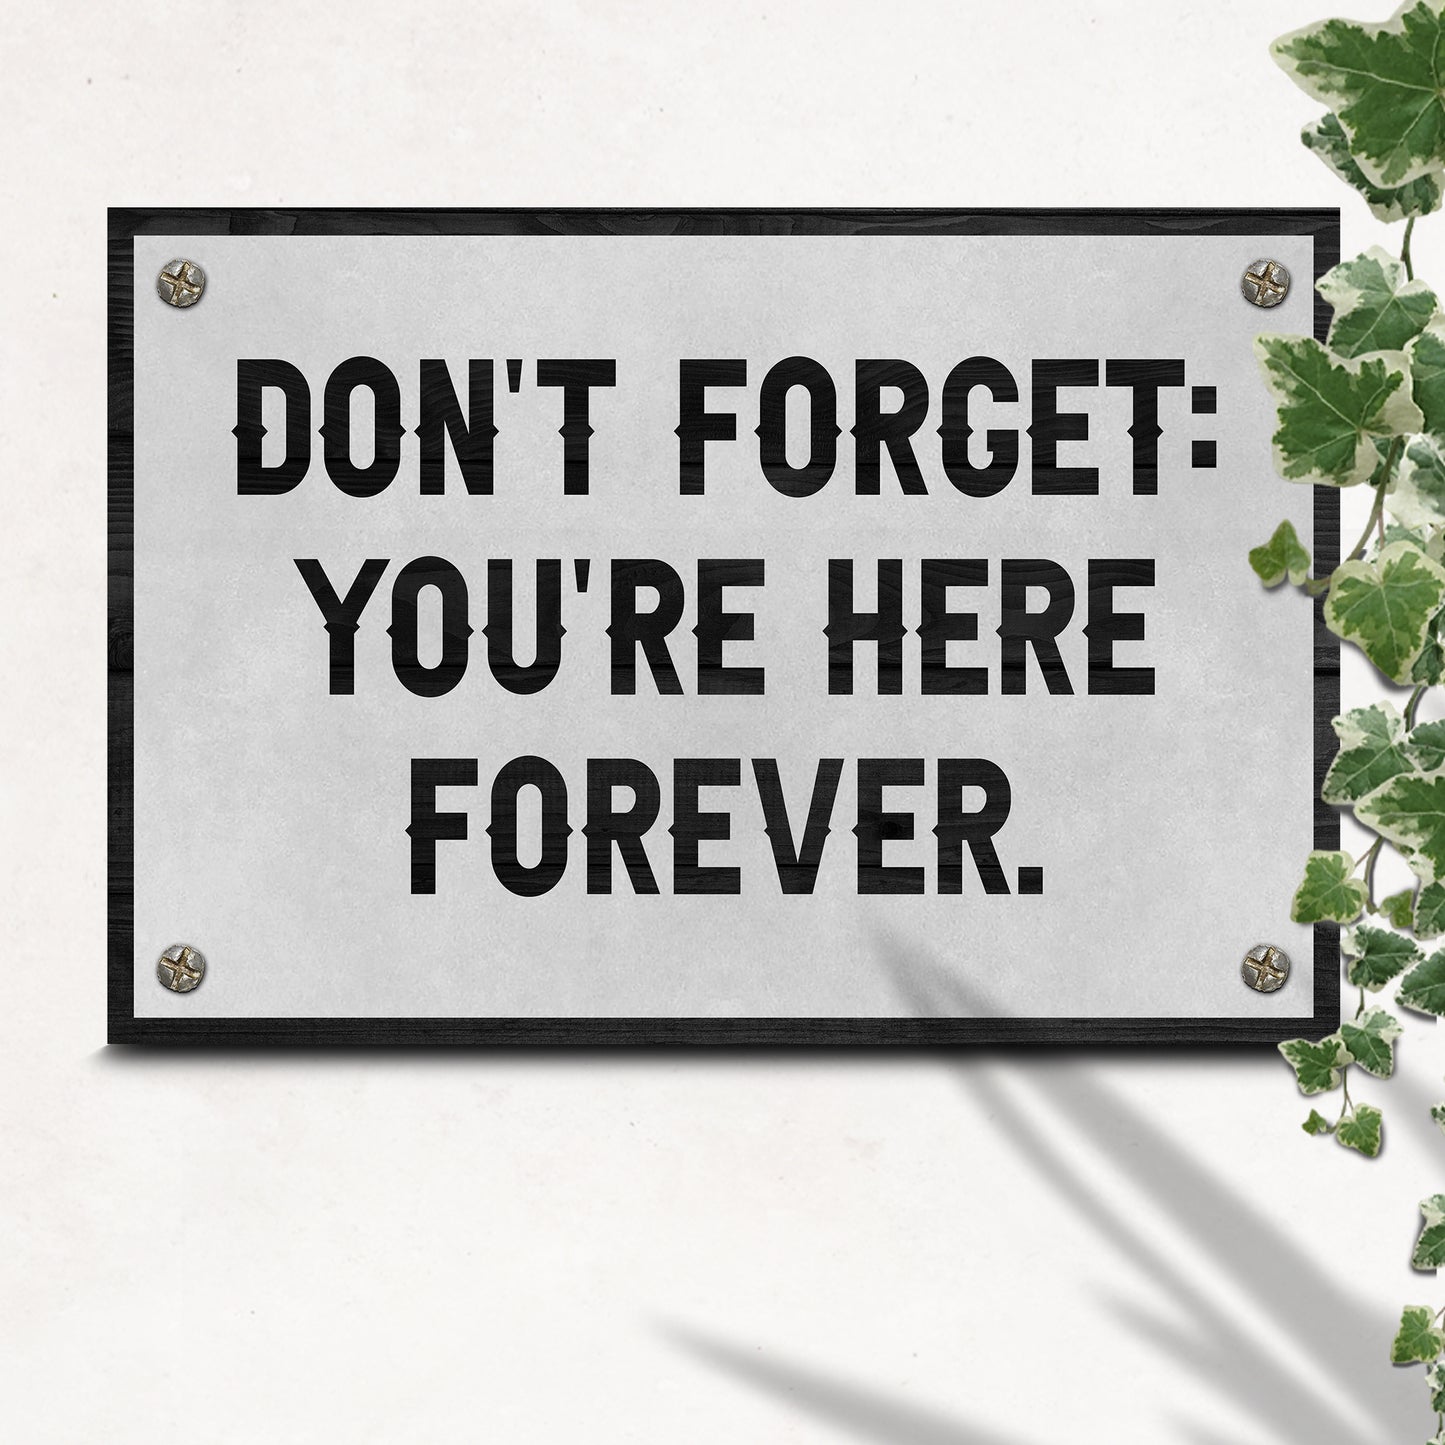 Don't Forget You're Here Forever Sign - Image by Tailored Canvases